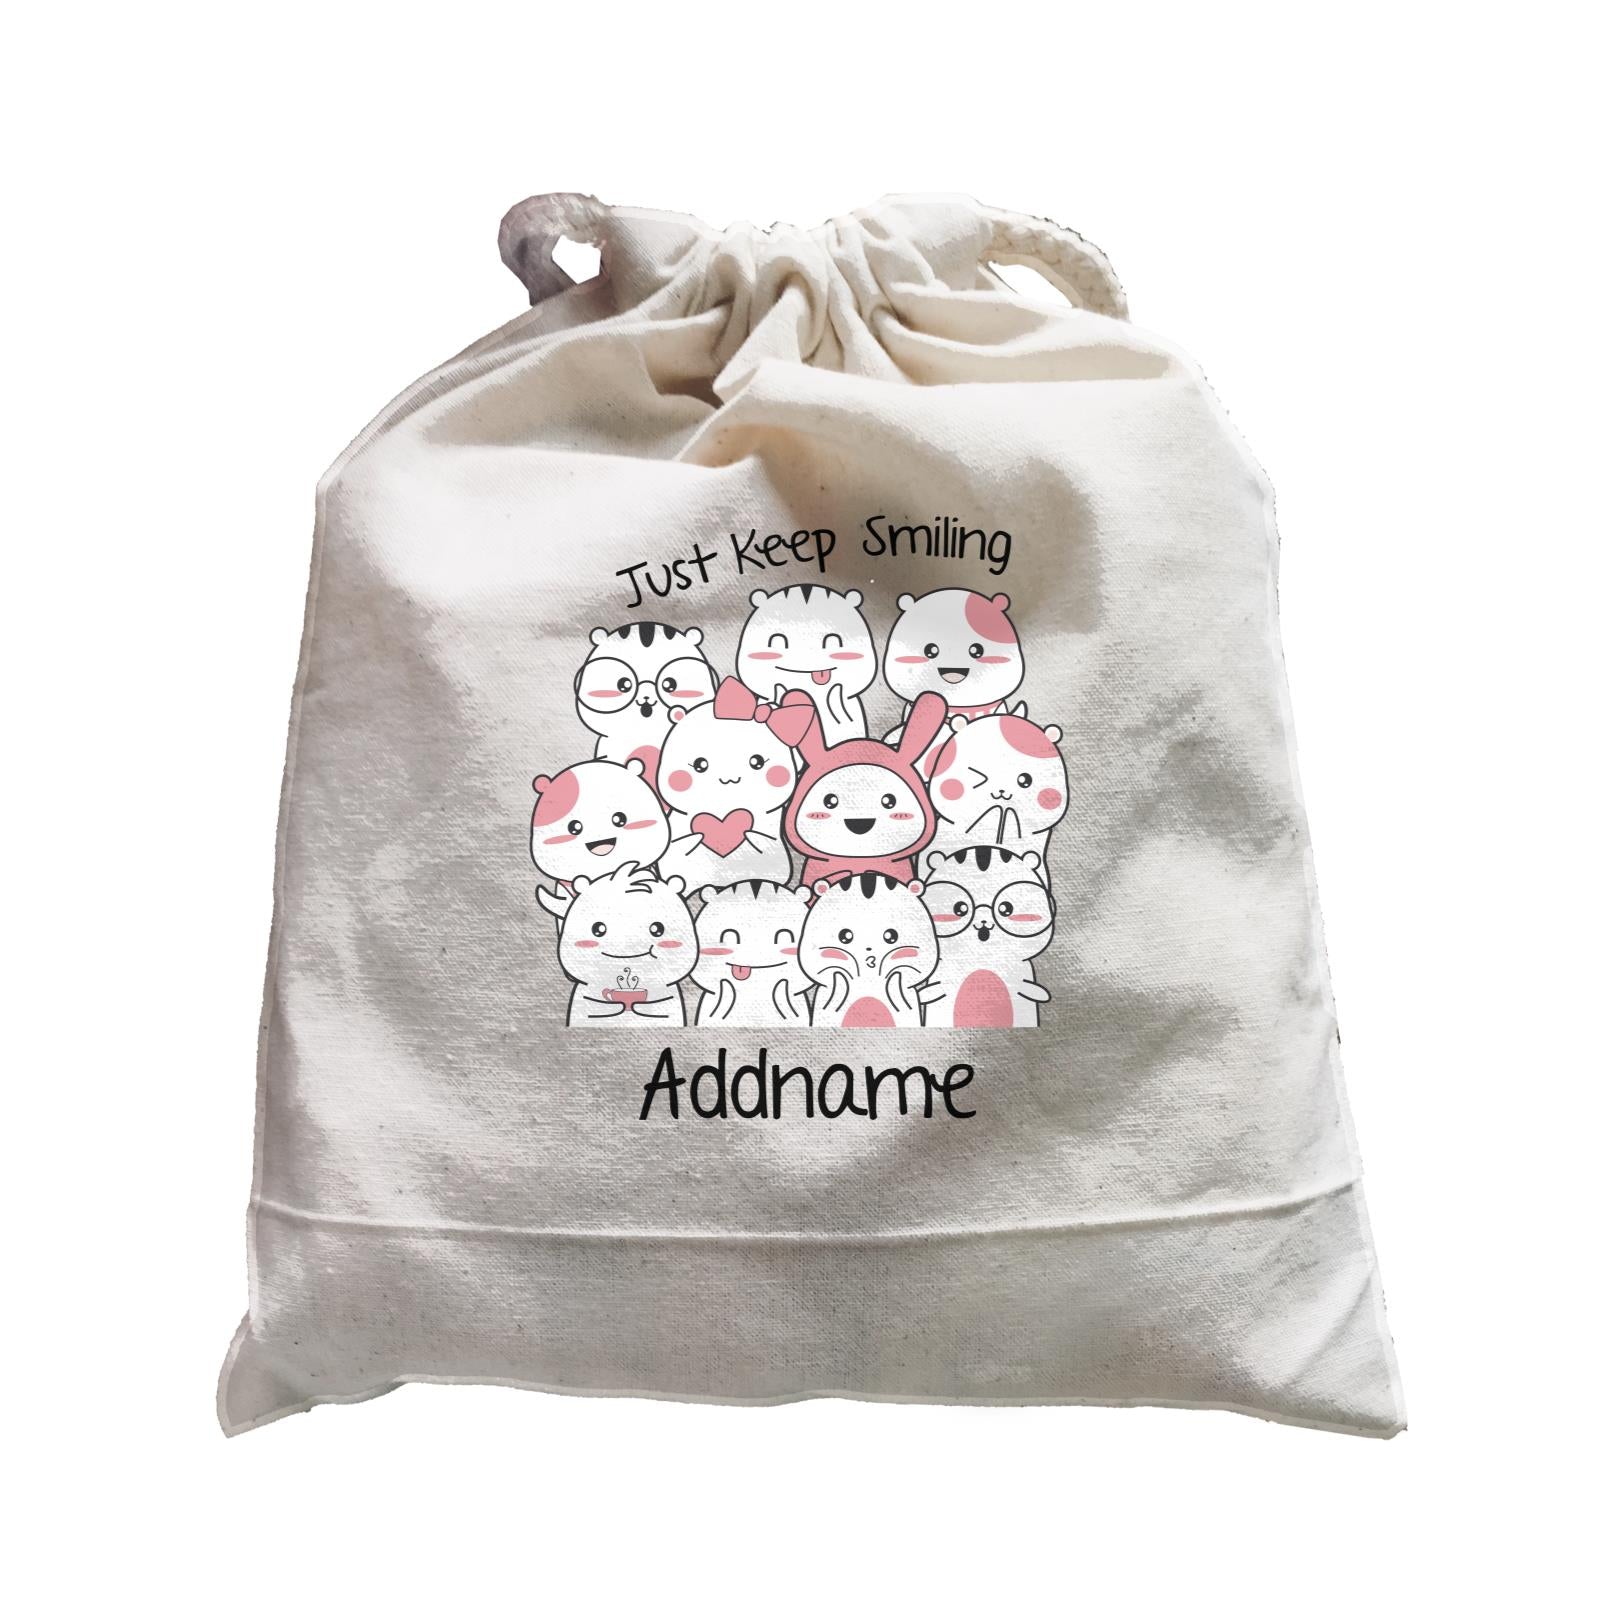 Cute Animals And Friends Series Cute Hamster Just Keep Smiling Addname Satchel